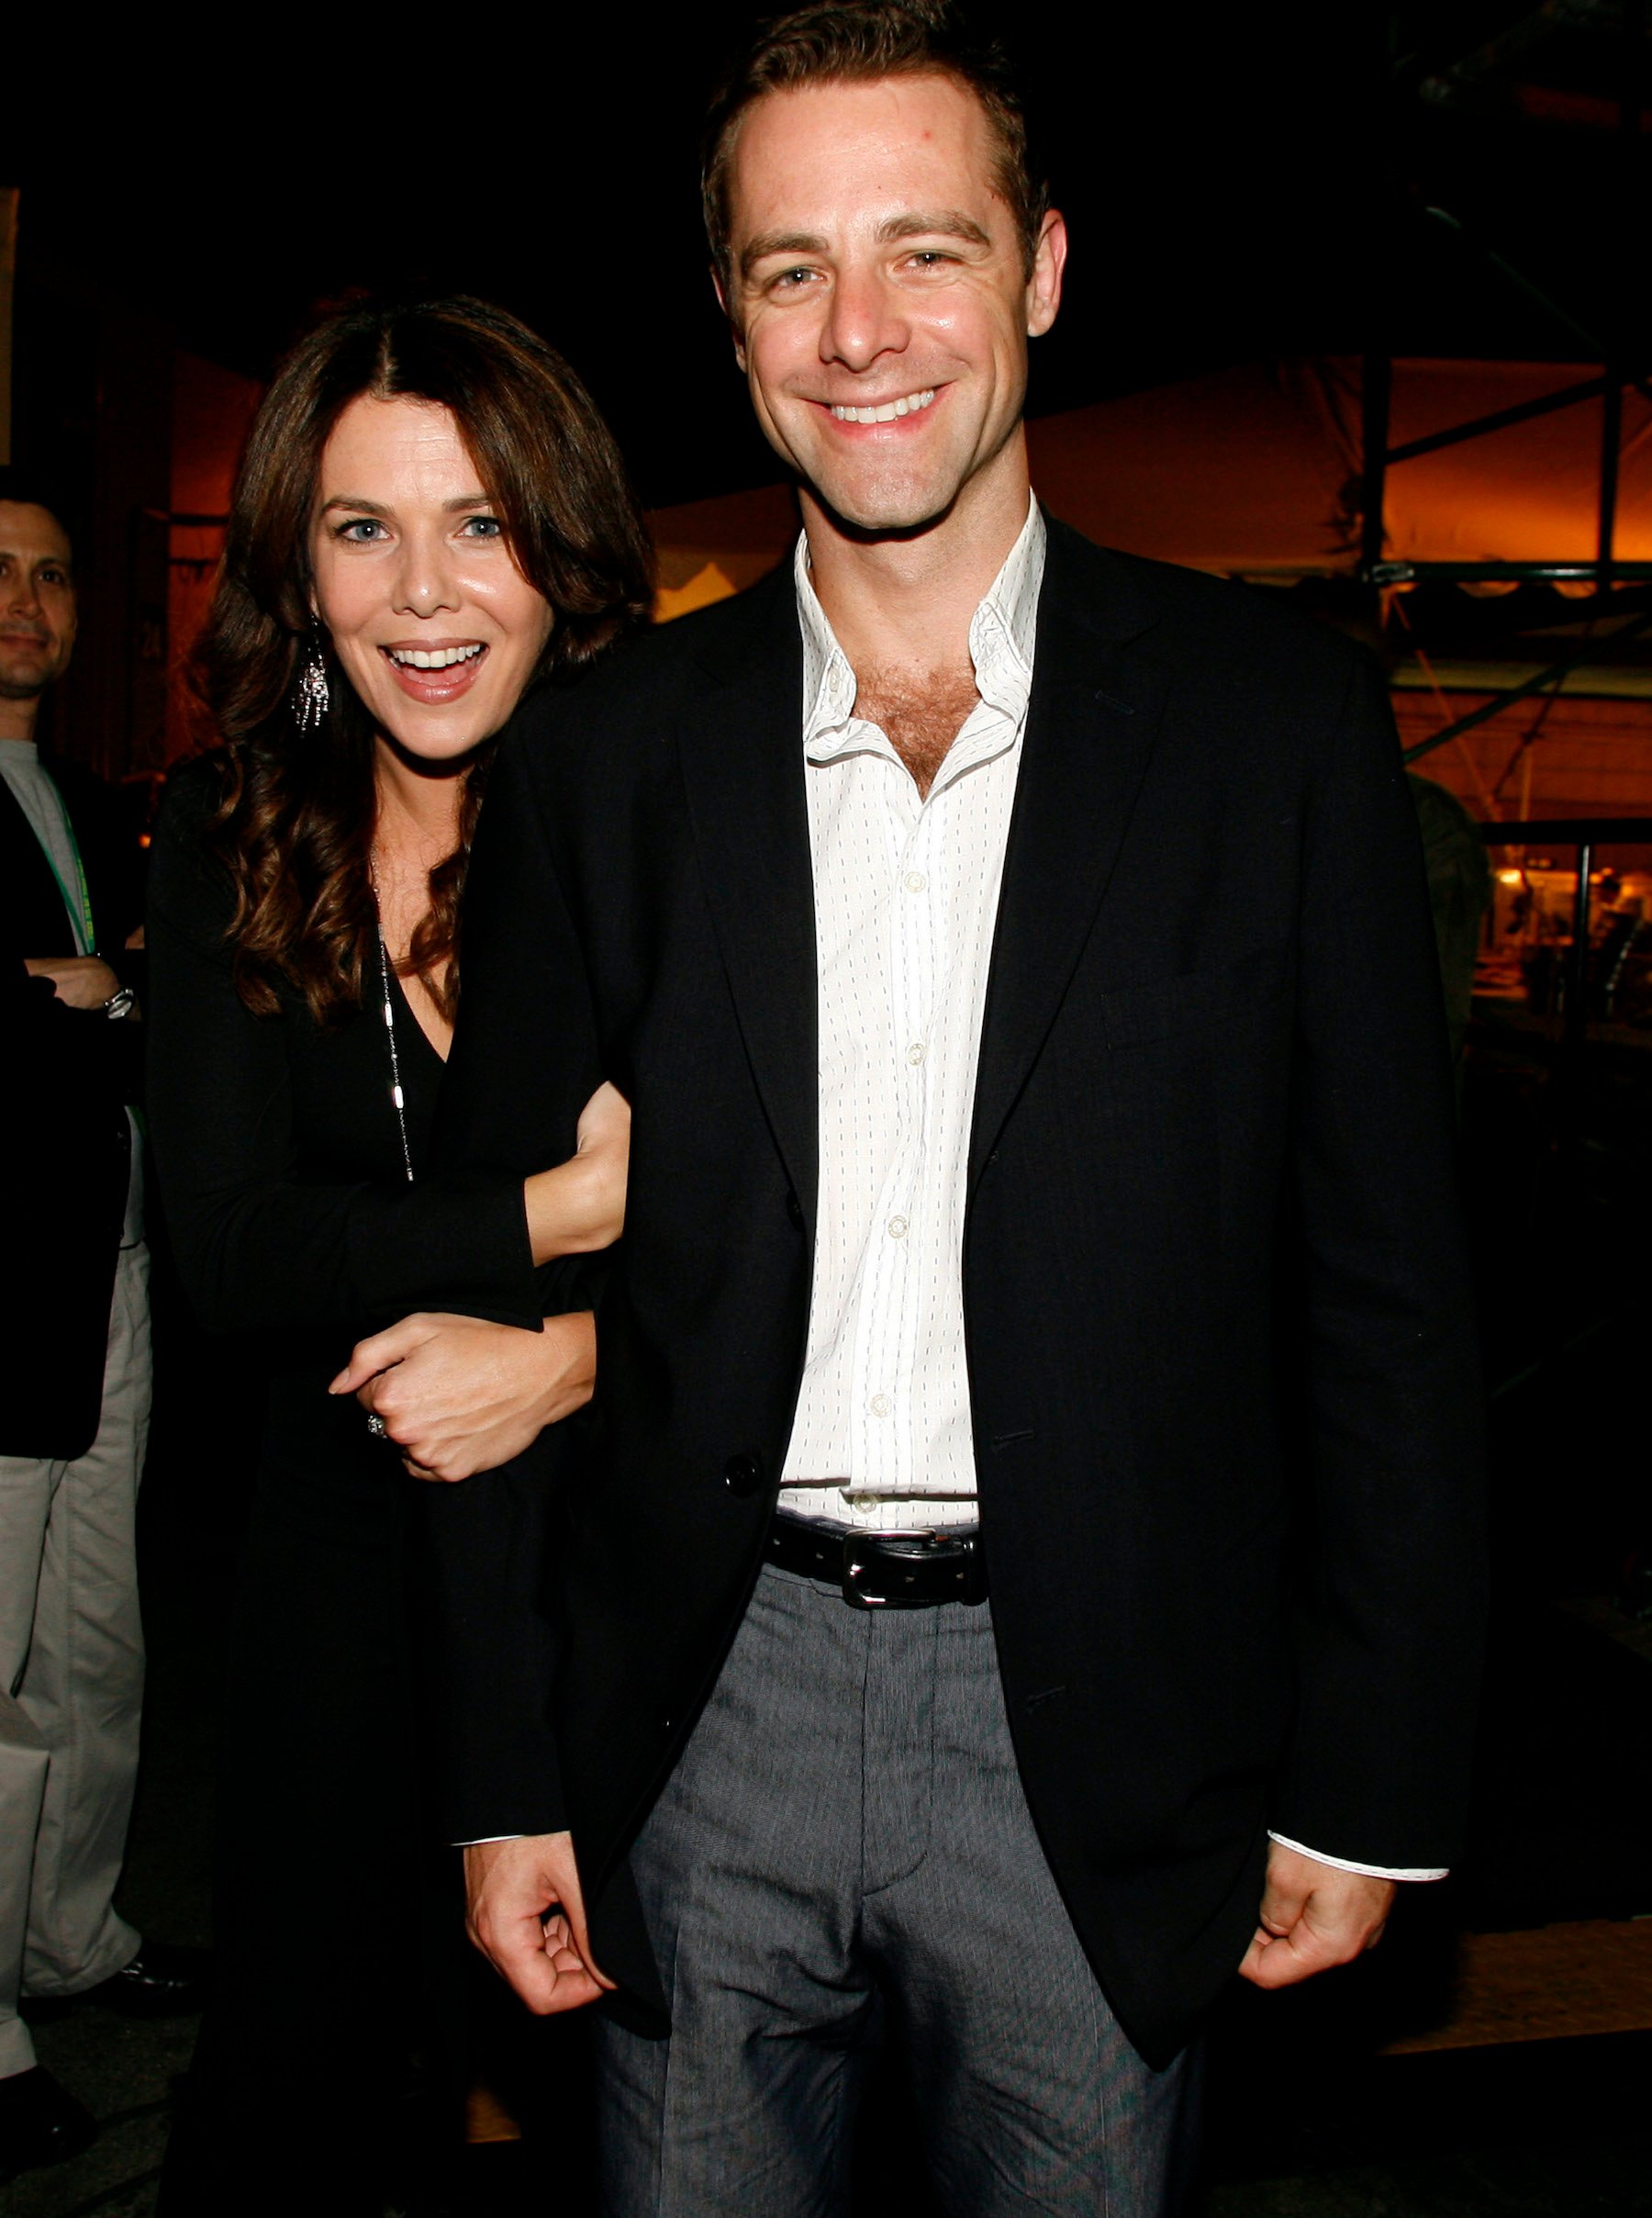 Lauren Graham and David Sutcliffe attend the CW launch party